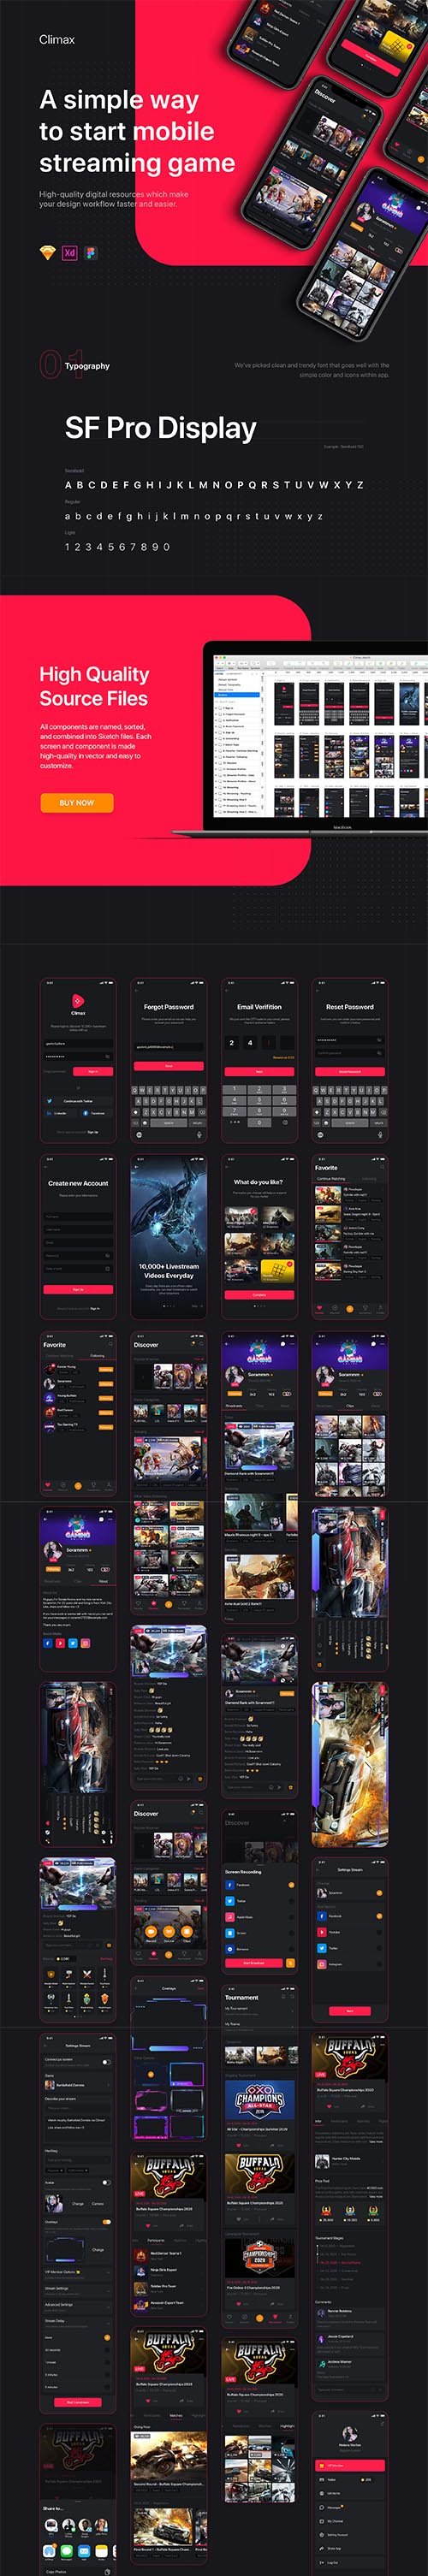 Climax - Live Game Streaming UI Kit